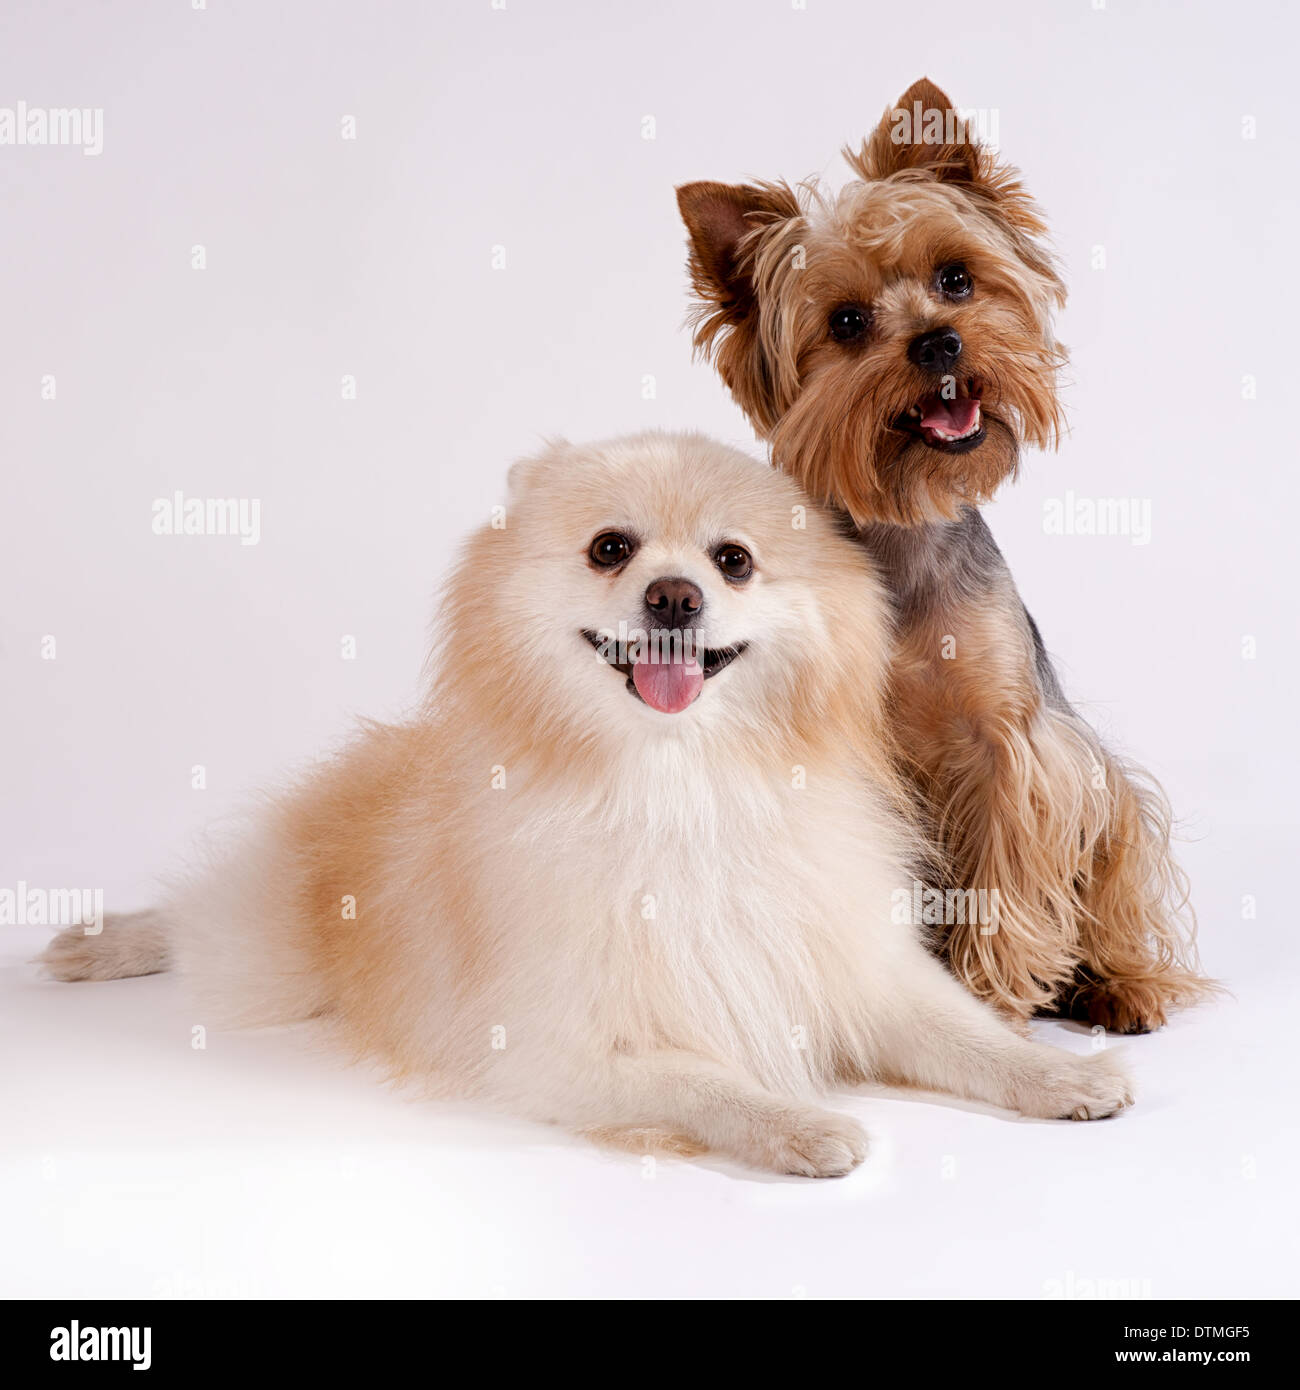 Two small dogs on a white background. Yorkshire Terrier and Spitz. Stock Photo